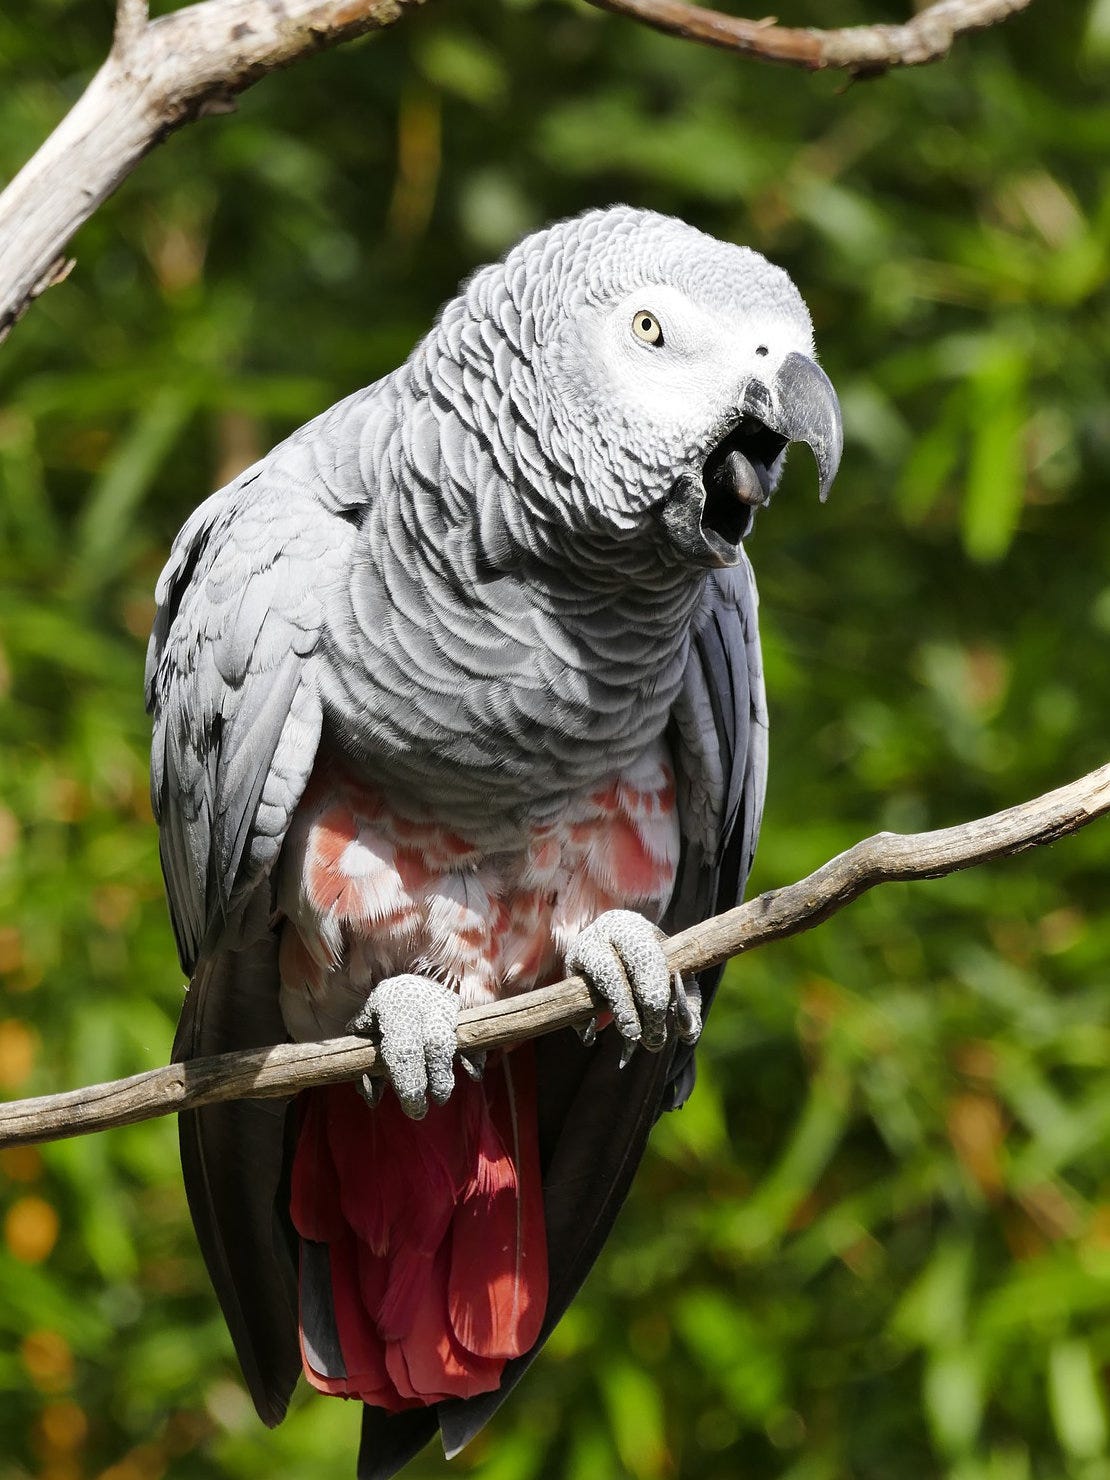 An African grey parrot perches on a dead branch, body facing the camera lens but head in three-quarters profile. Its curved charcoal beak is fully open, perhaps in mid-yell, its black tongue showing. Its feet are scaly grey with very long sharp talons; two toes wrap in front of the branch and two behind. Most of its feathers are shades of soft dove grey, but its underside near its legs are rose and white, and its tail feathers are salmon. Its eye is pale green-grey with a small pupil. Blurred green and brown foliage is visible in the background.